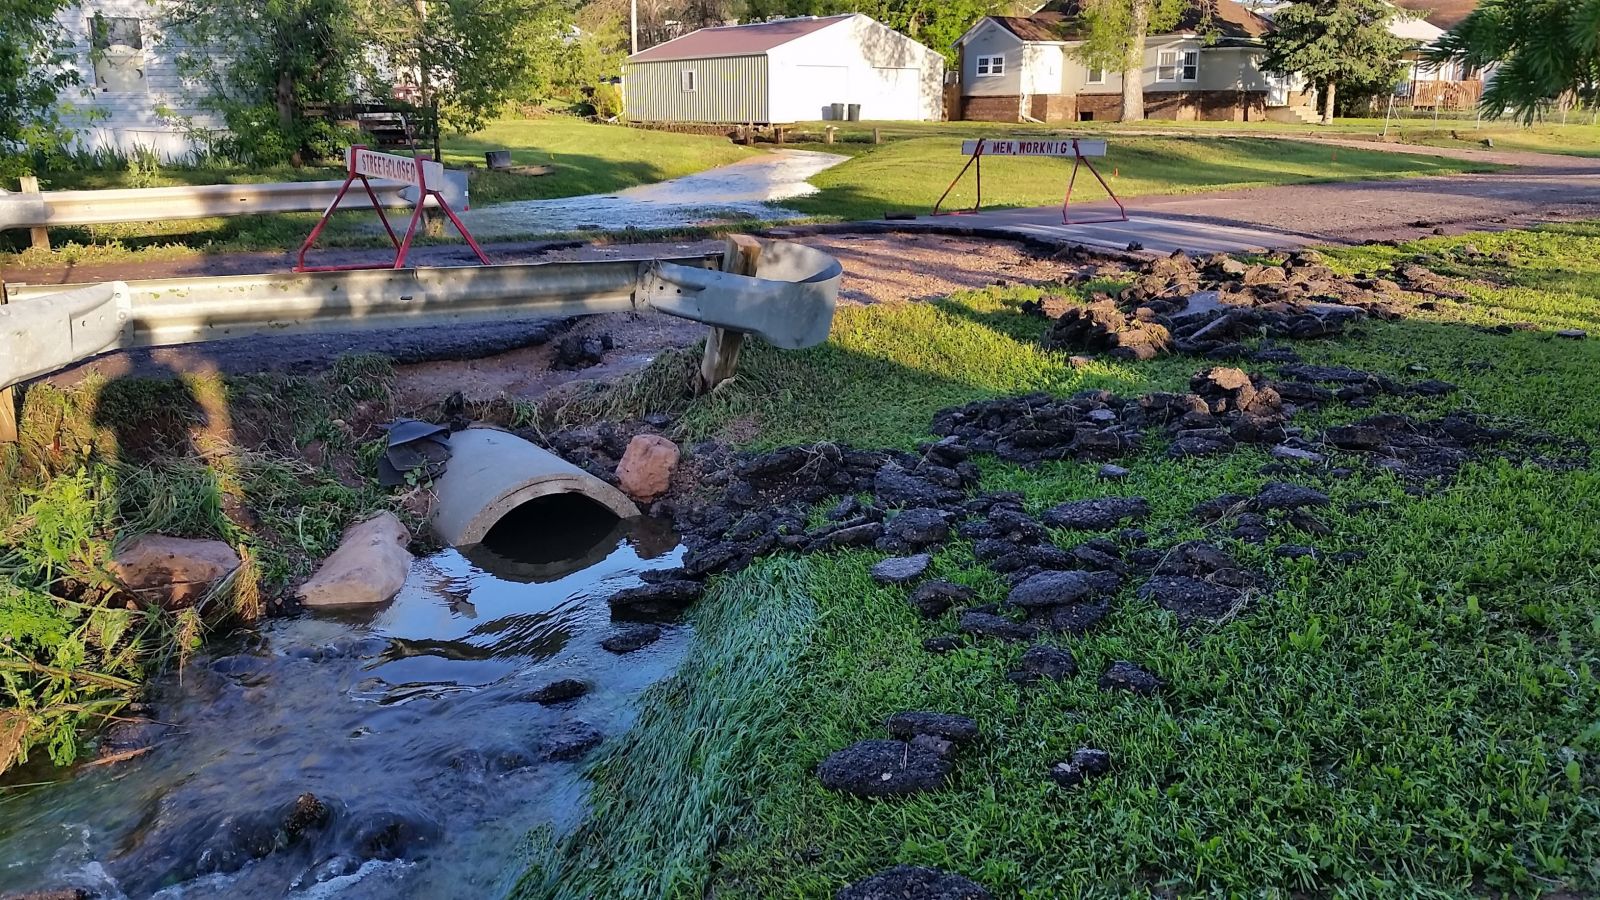 Flooding aftermath photos from Piedmont, SD